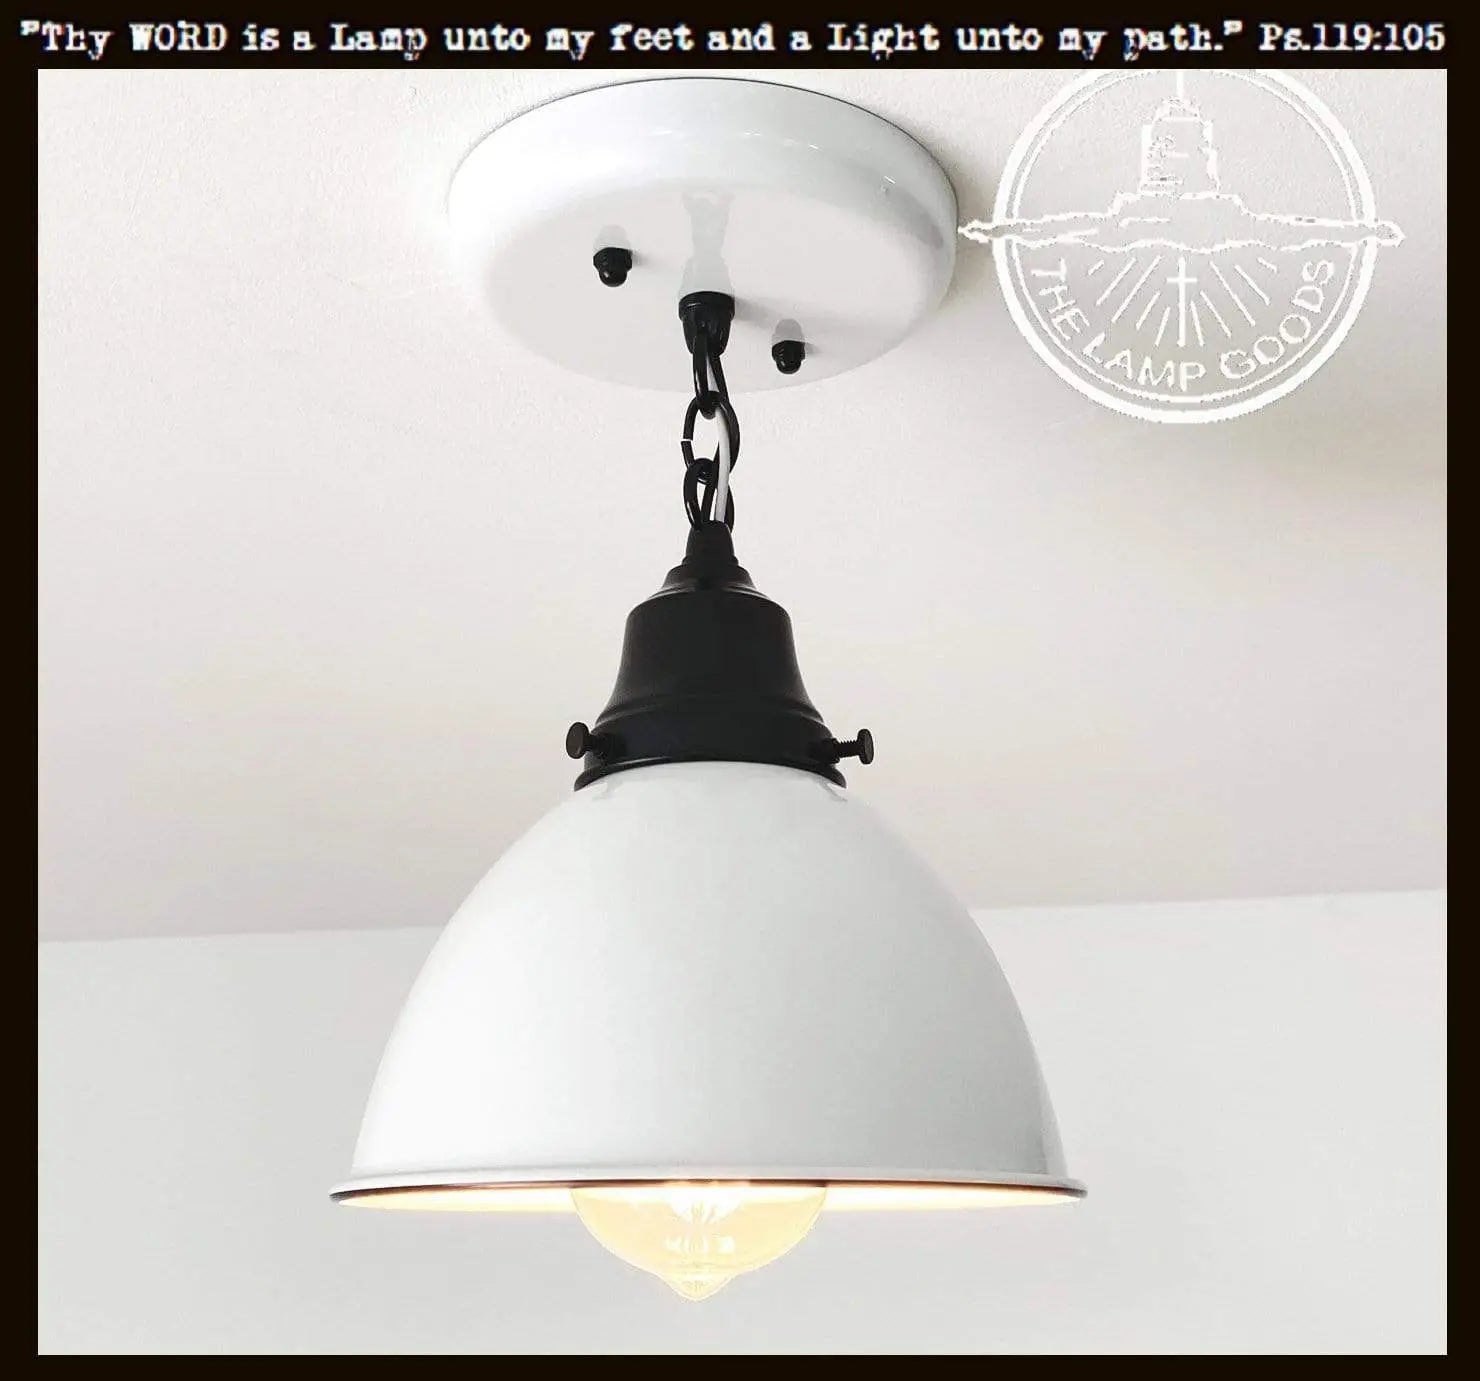 White Enamel Farmhouse Ceiling Light with Chain The Lamp Goods